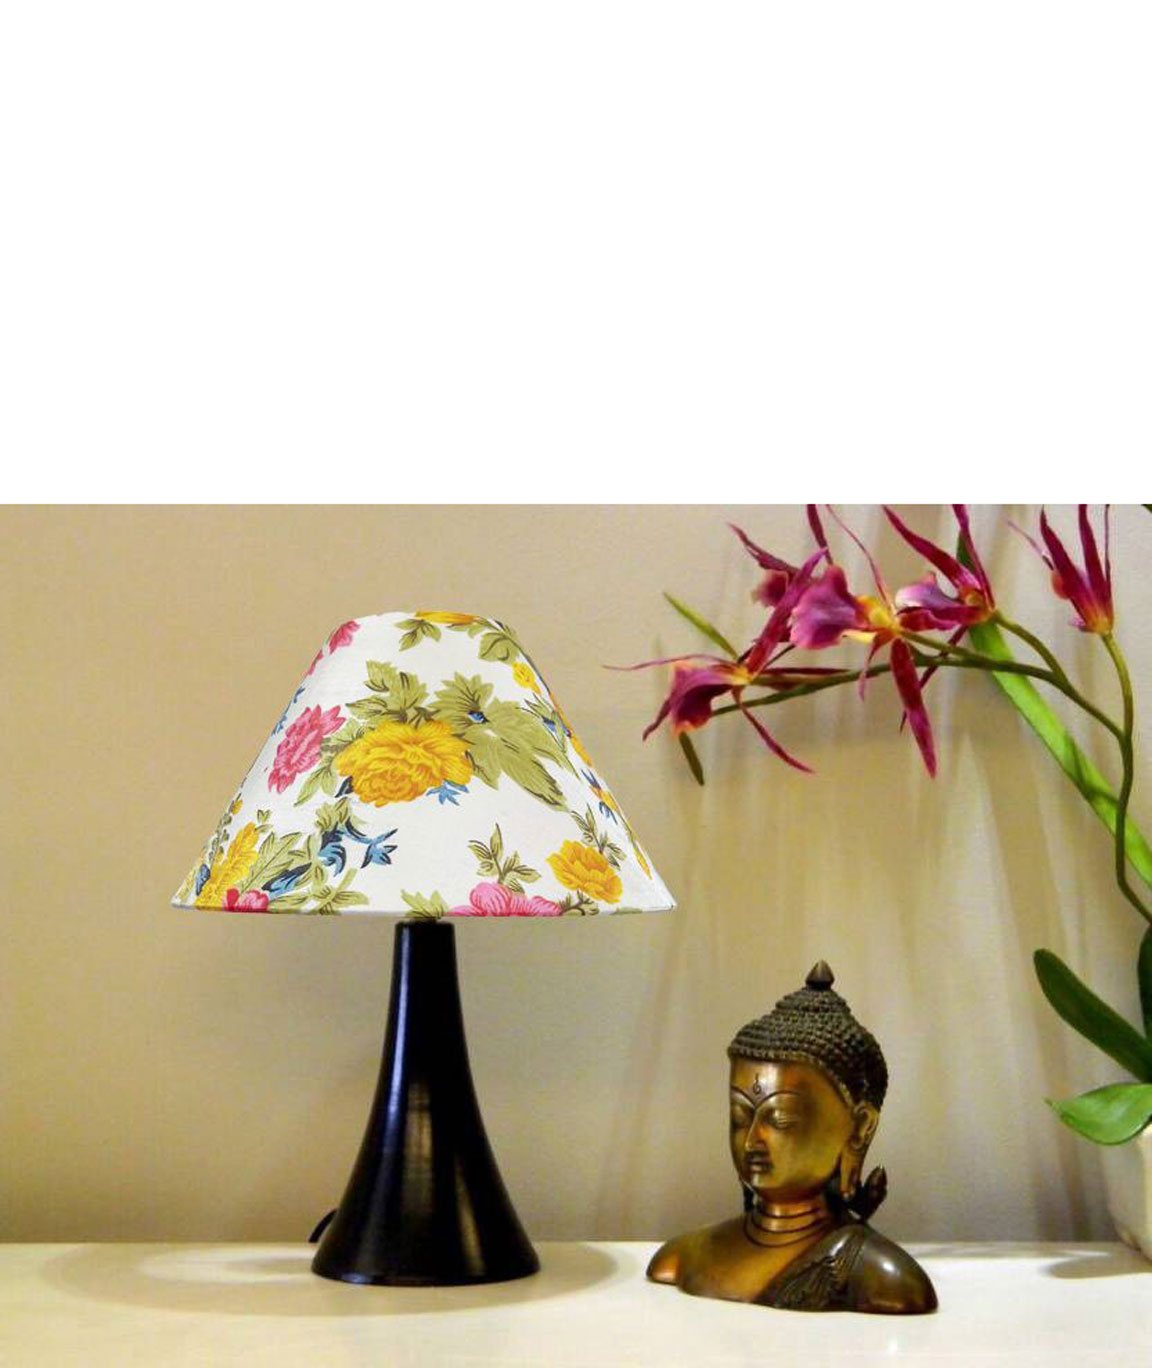 RDC Black Conical Stand Table Lamp with 10 Inches Round Multi-colour Floral Designer Lamp Shade